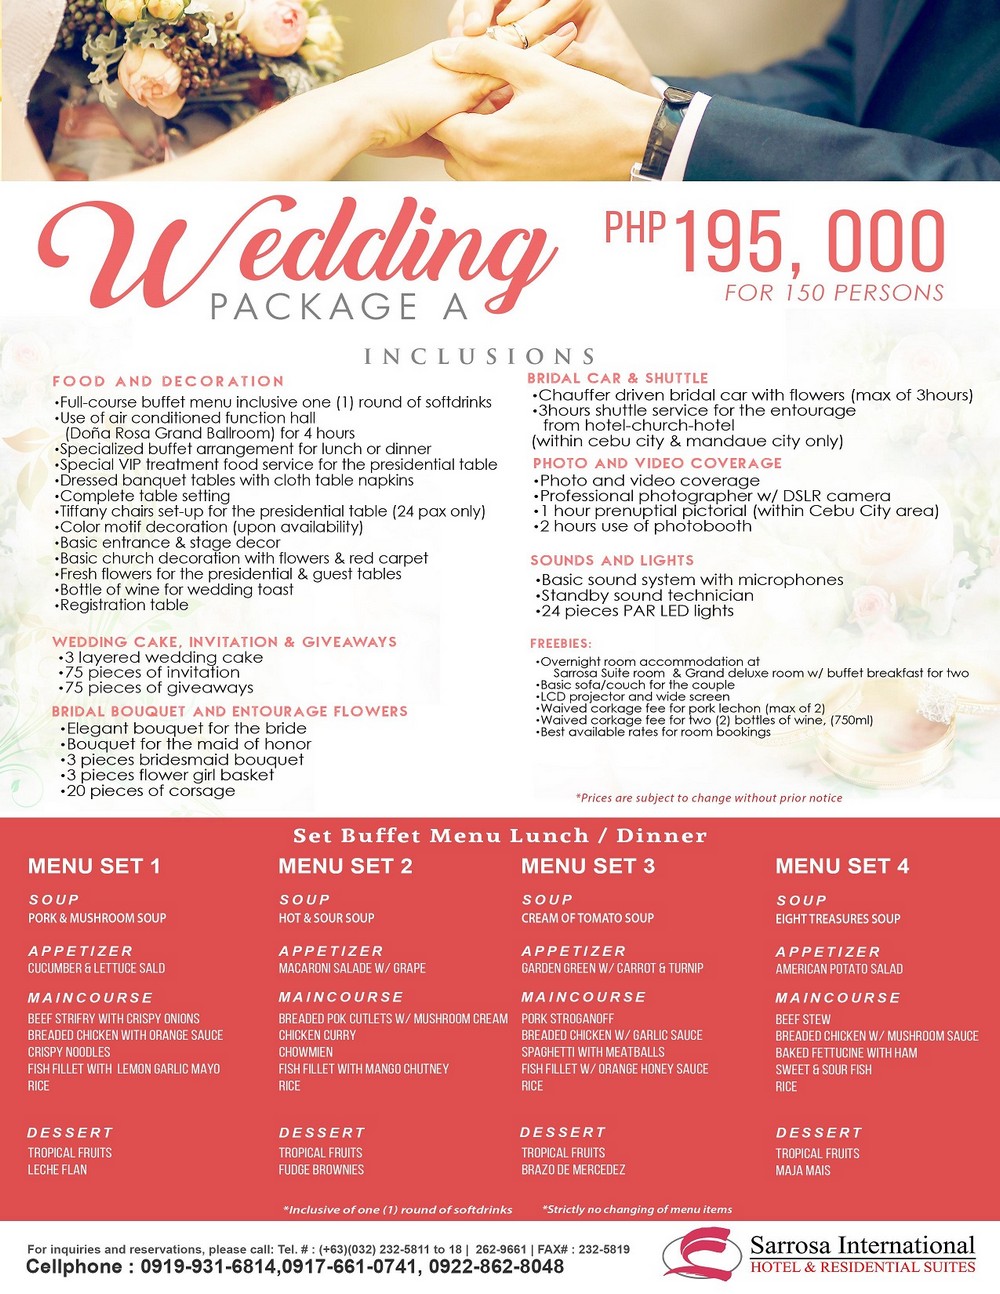 Wedding package A